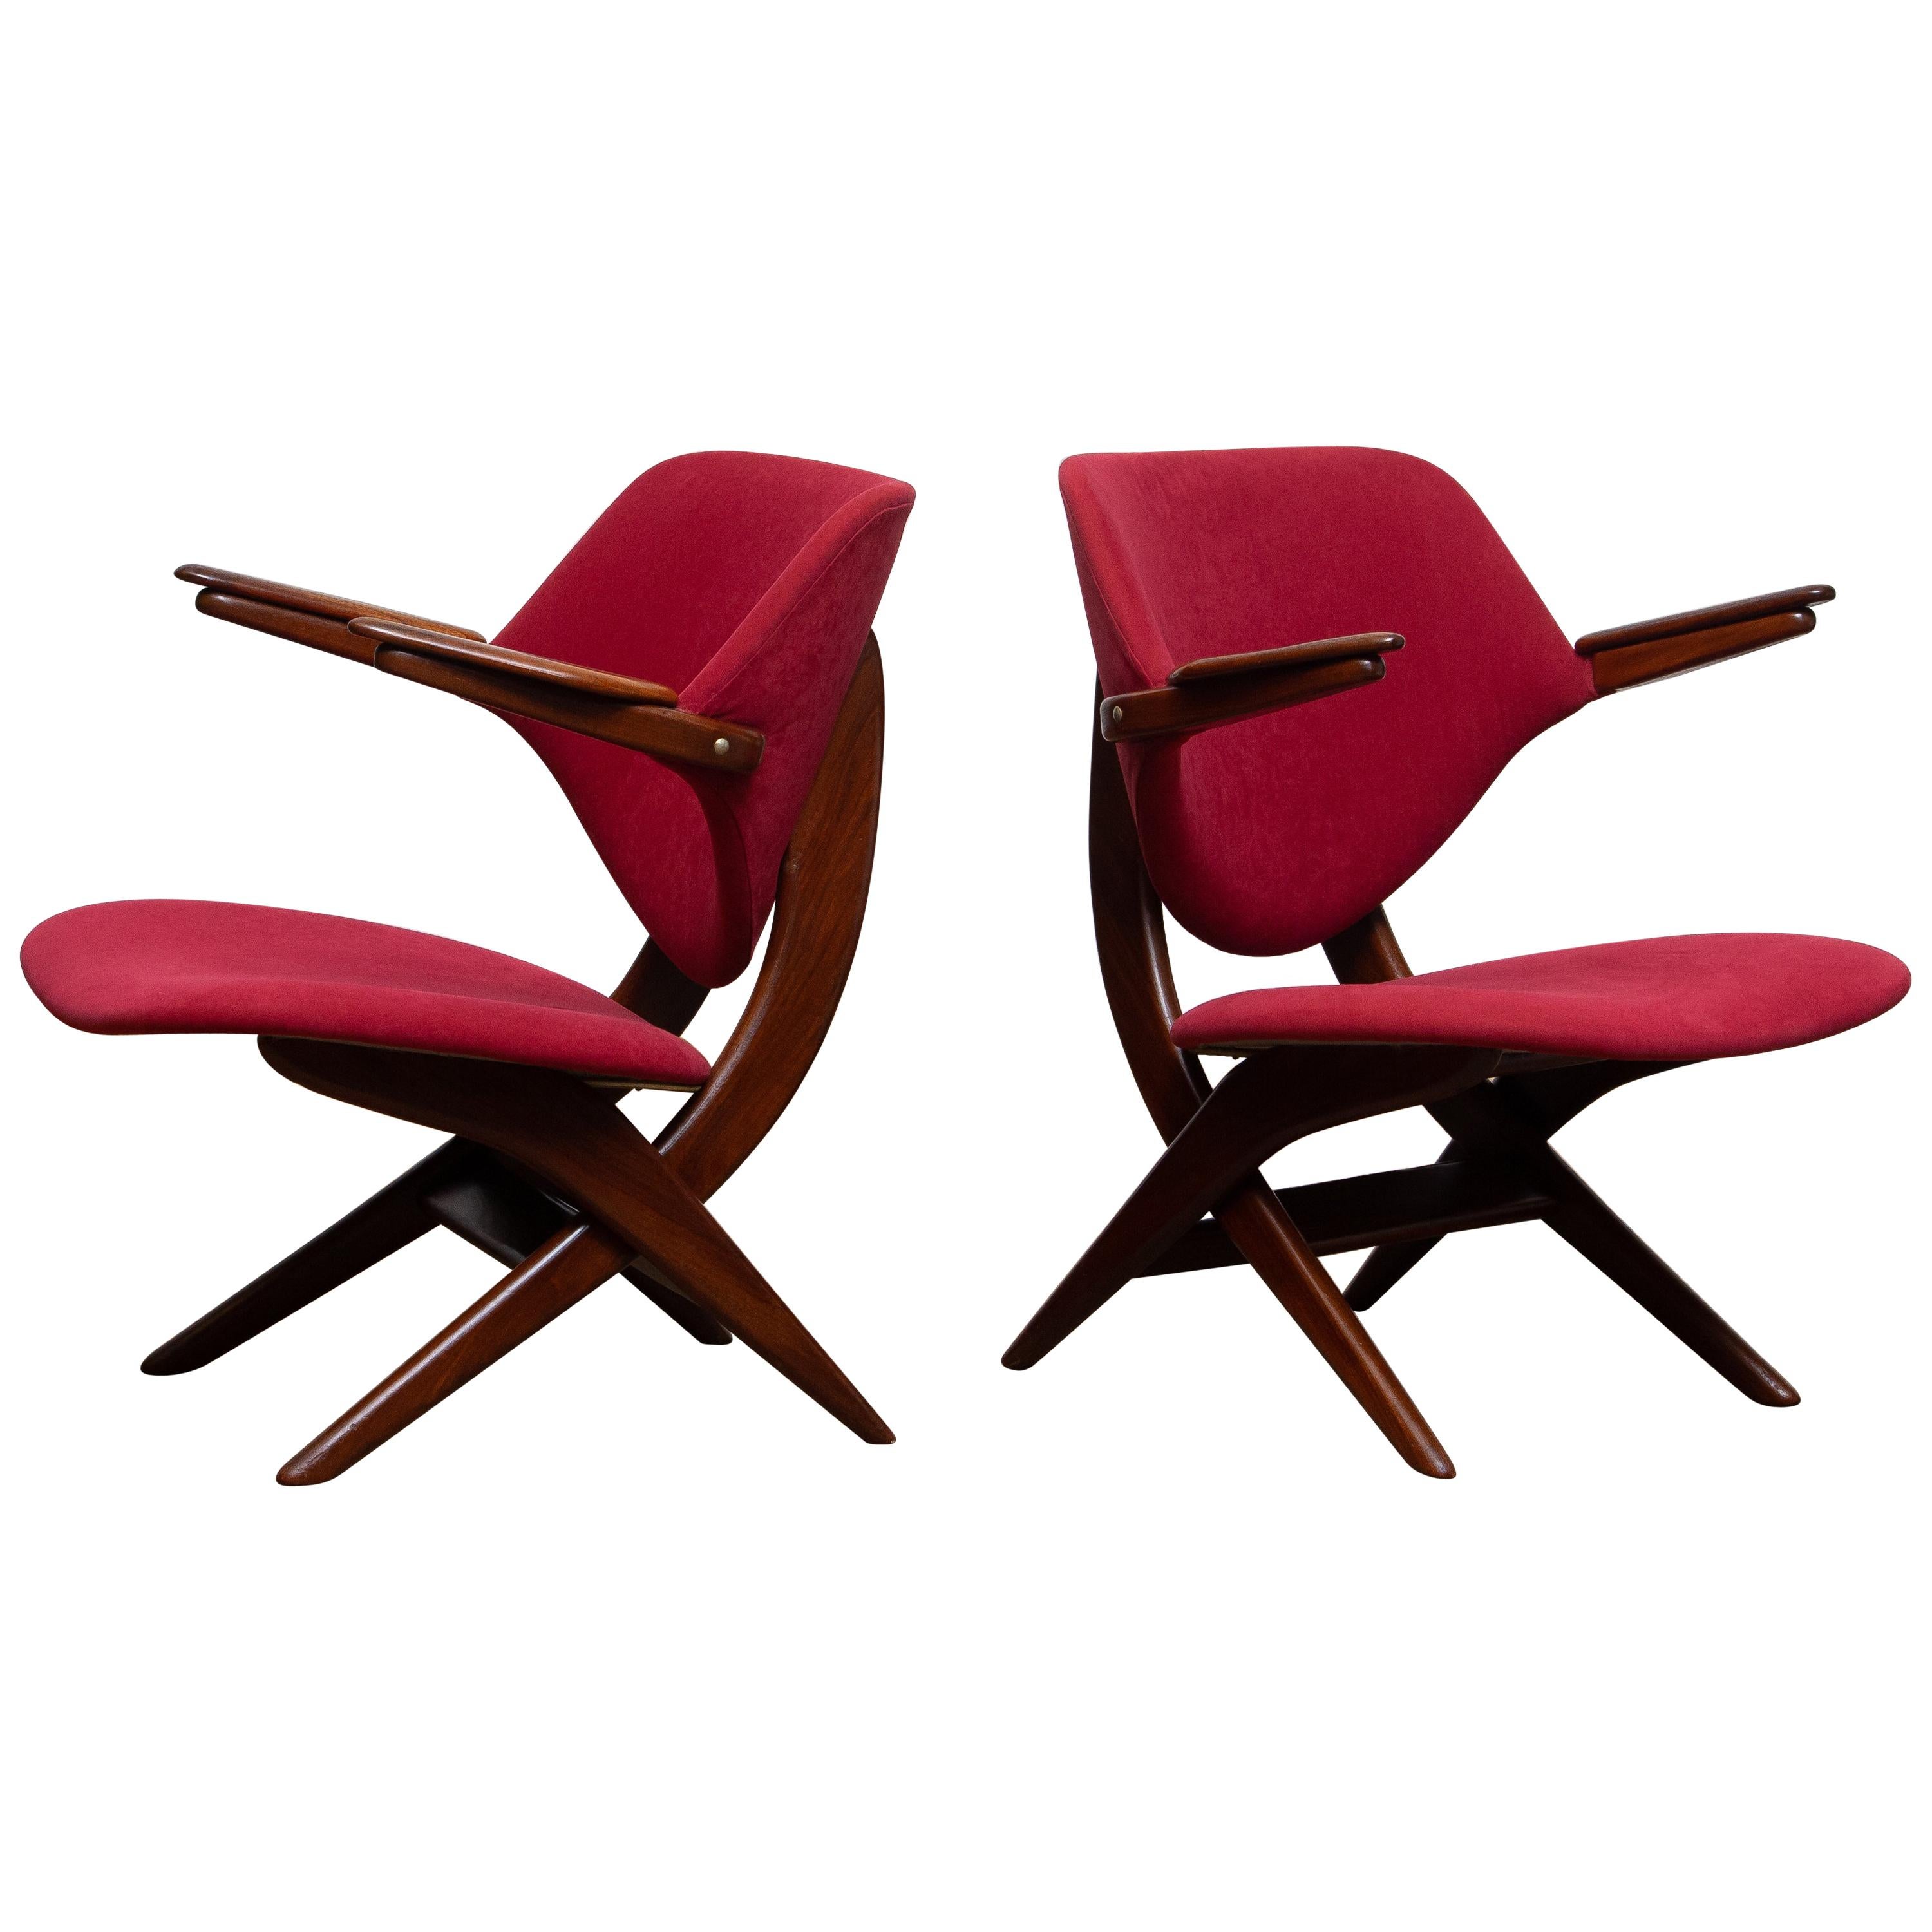 Mid-20th Century 1950s, Set of Two Teak Lounge/Easy Chairs by Louis Van Teeffelen for Wébé